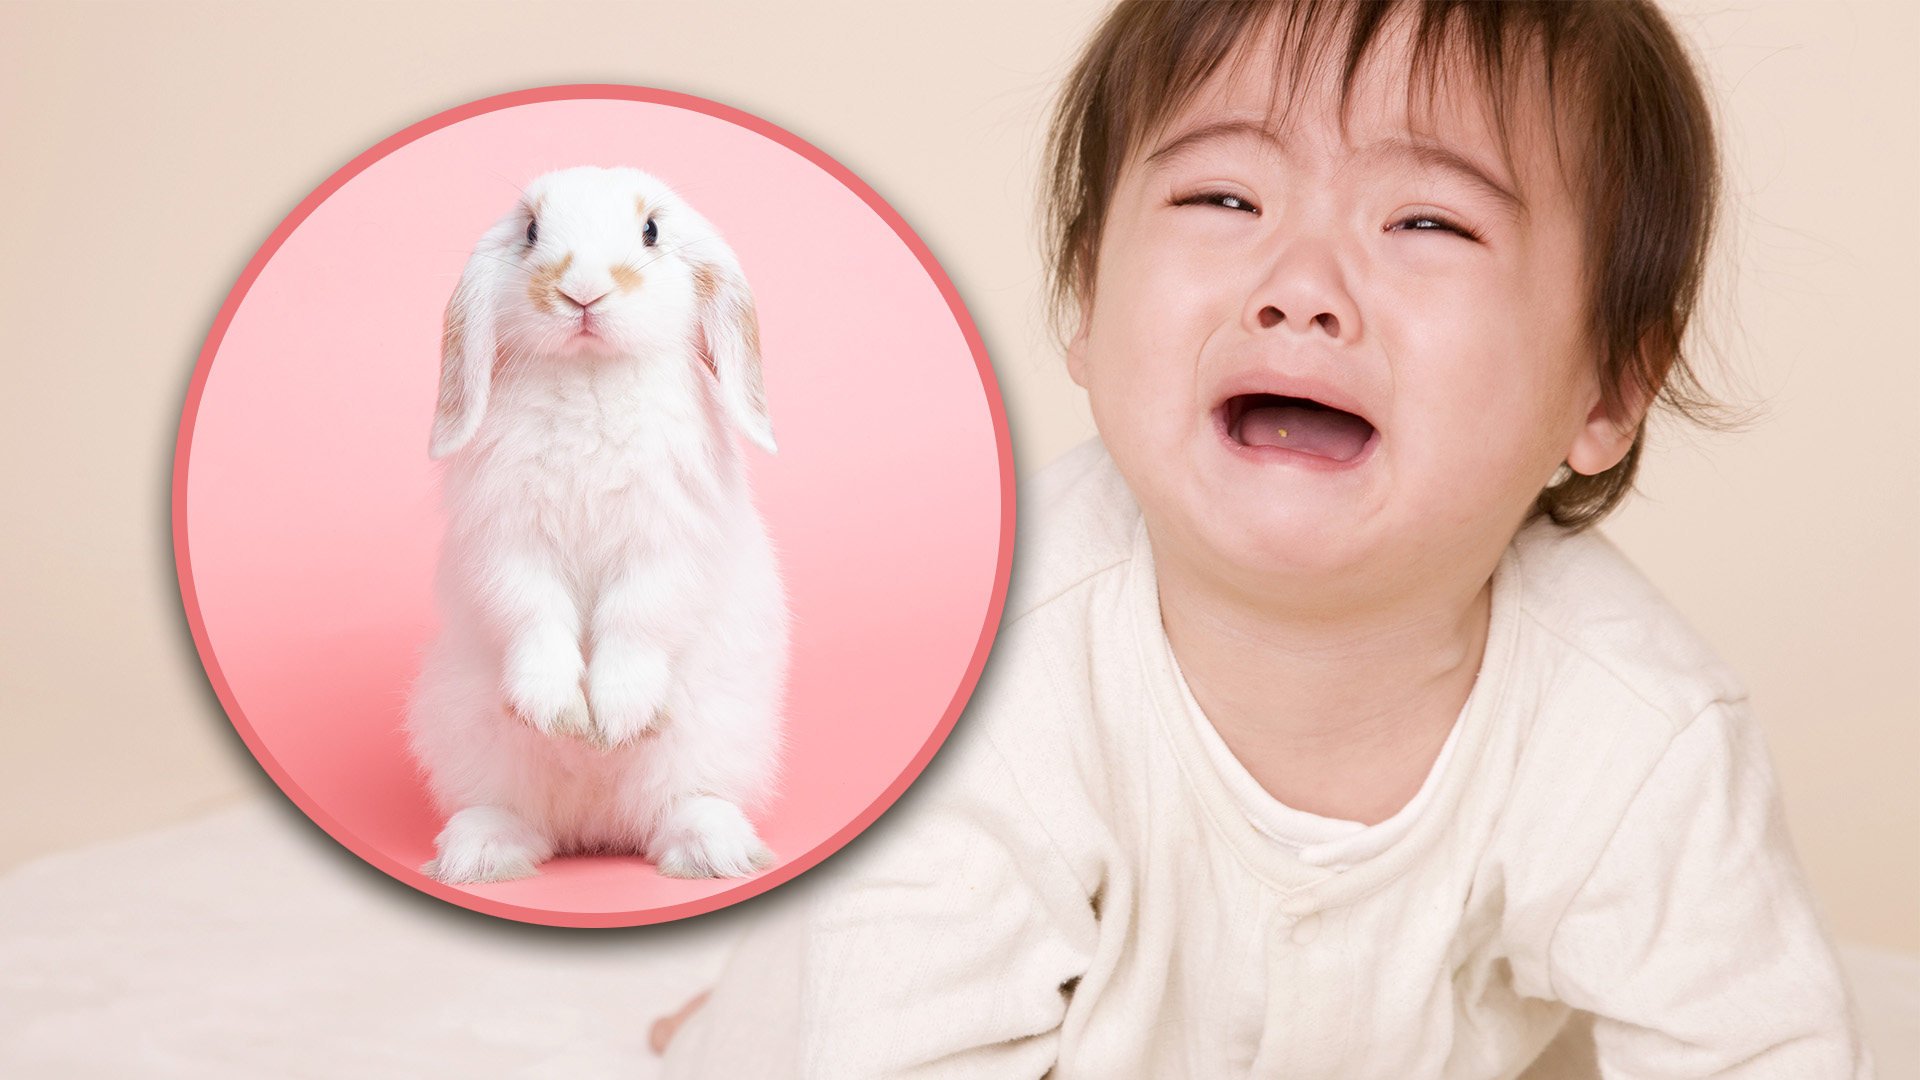 Doctors in China were unable to reattach the finger of a baby girl which was bitten off by her pet rabbit because her family forgot to bring the severed digit to the hospital. Photo: SCMP composite/Shutterstock